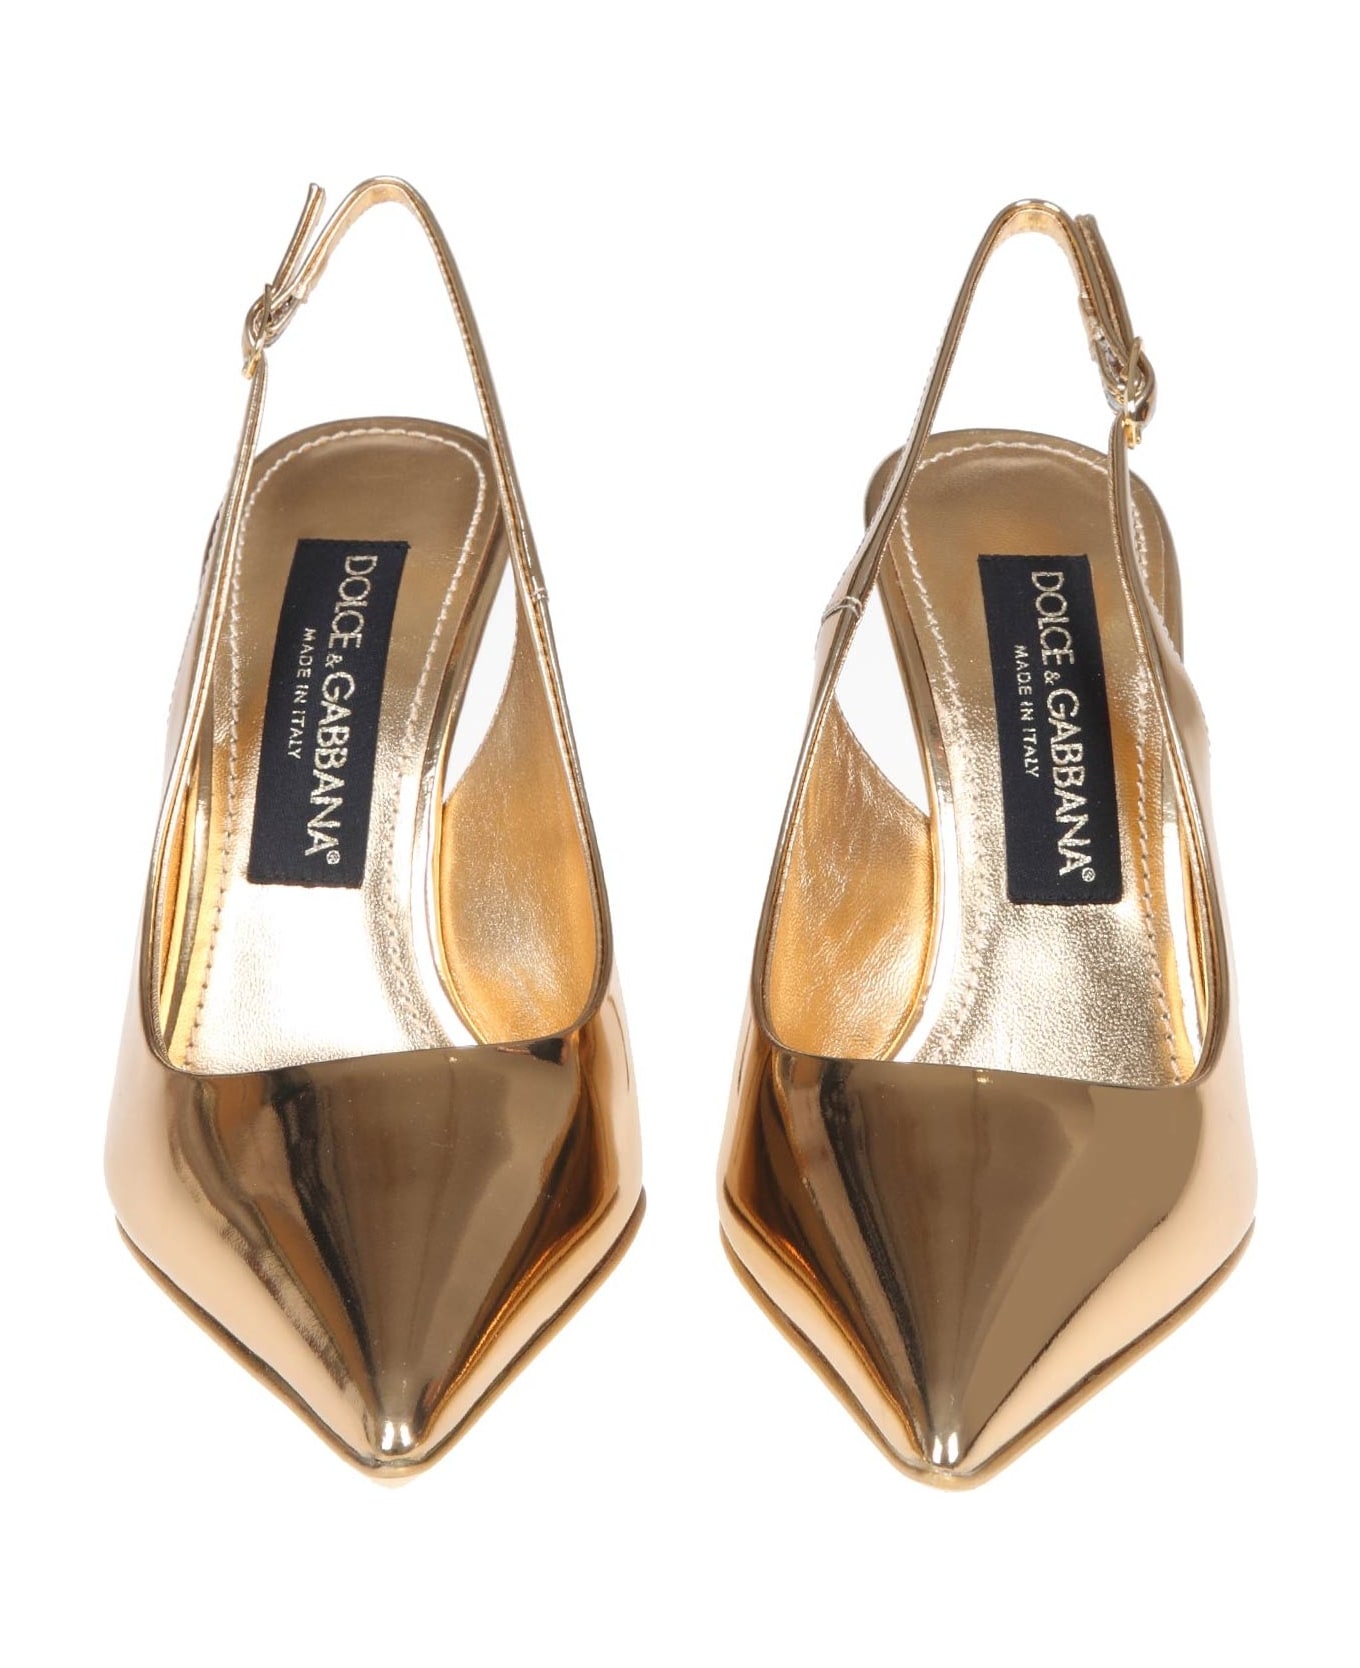 Dolce & Gabbana Slingback In Gold Mirror Leather - Light gold ハイヒール